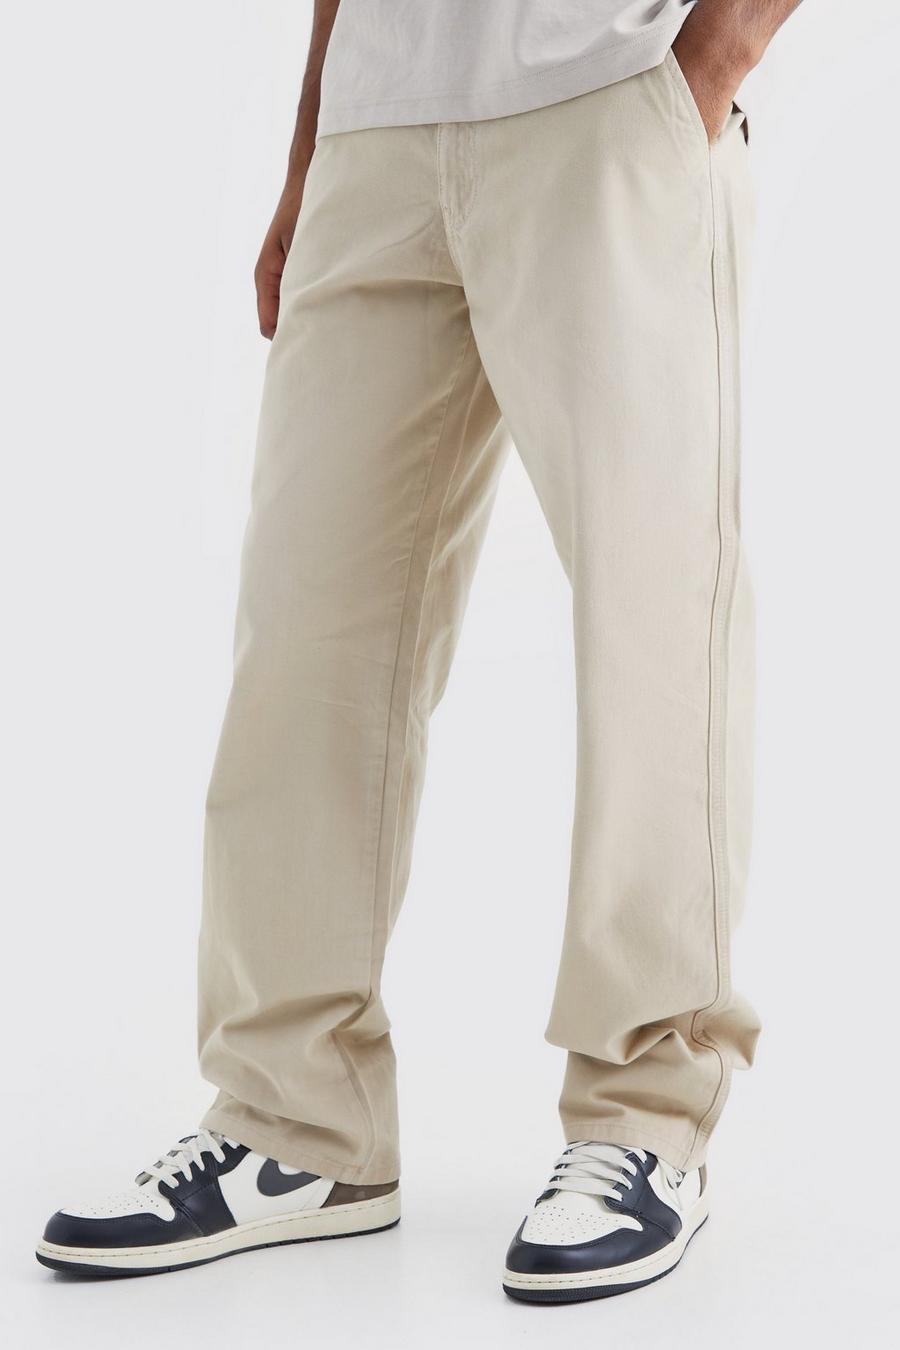 Stone Tall Relaxed Chino Trouser